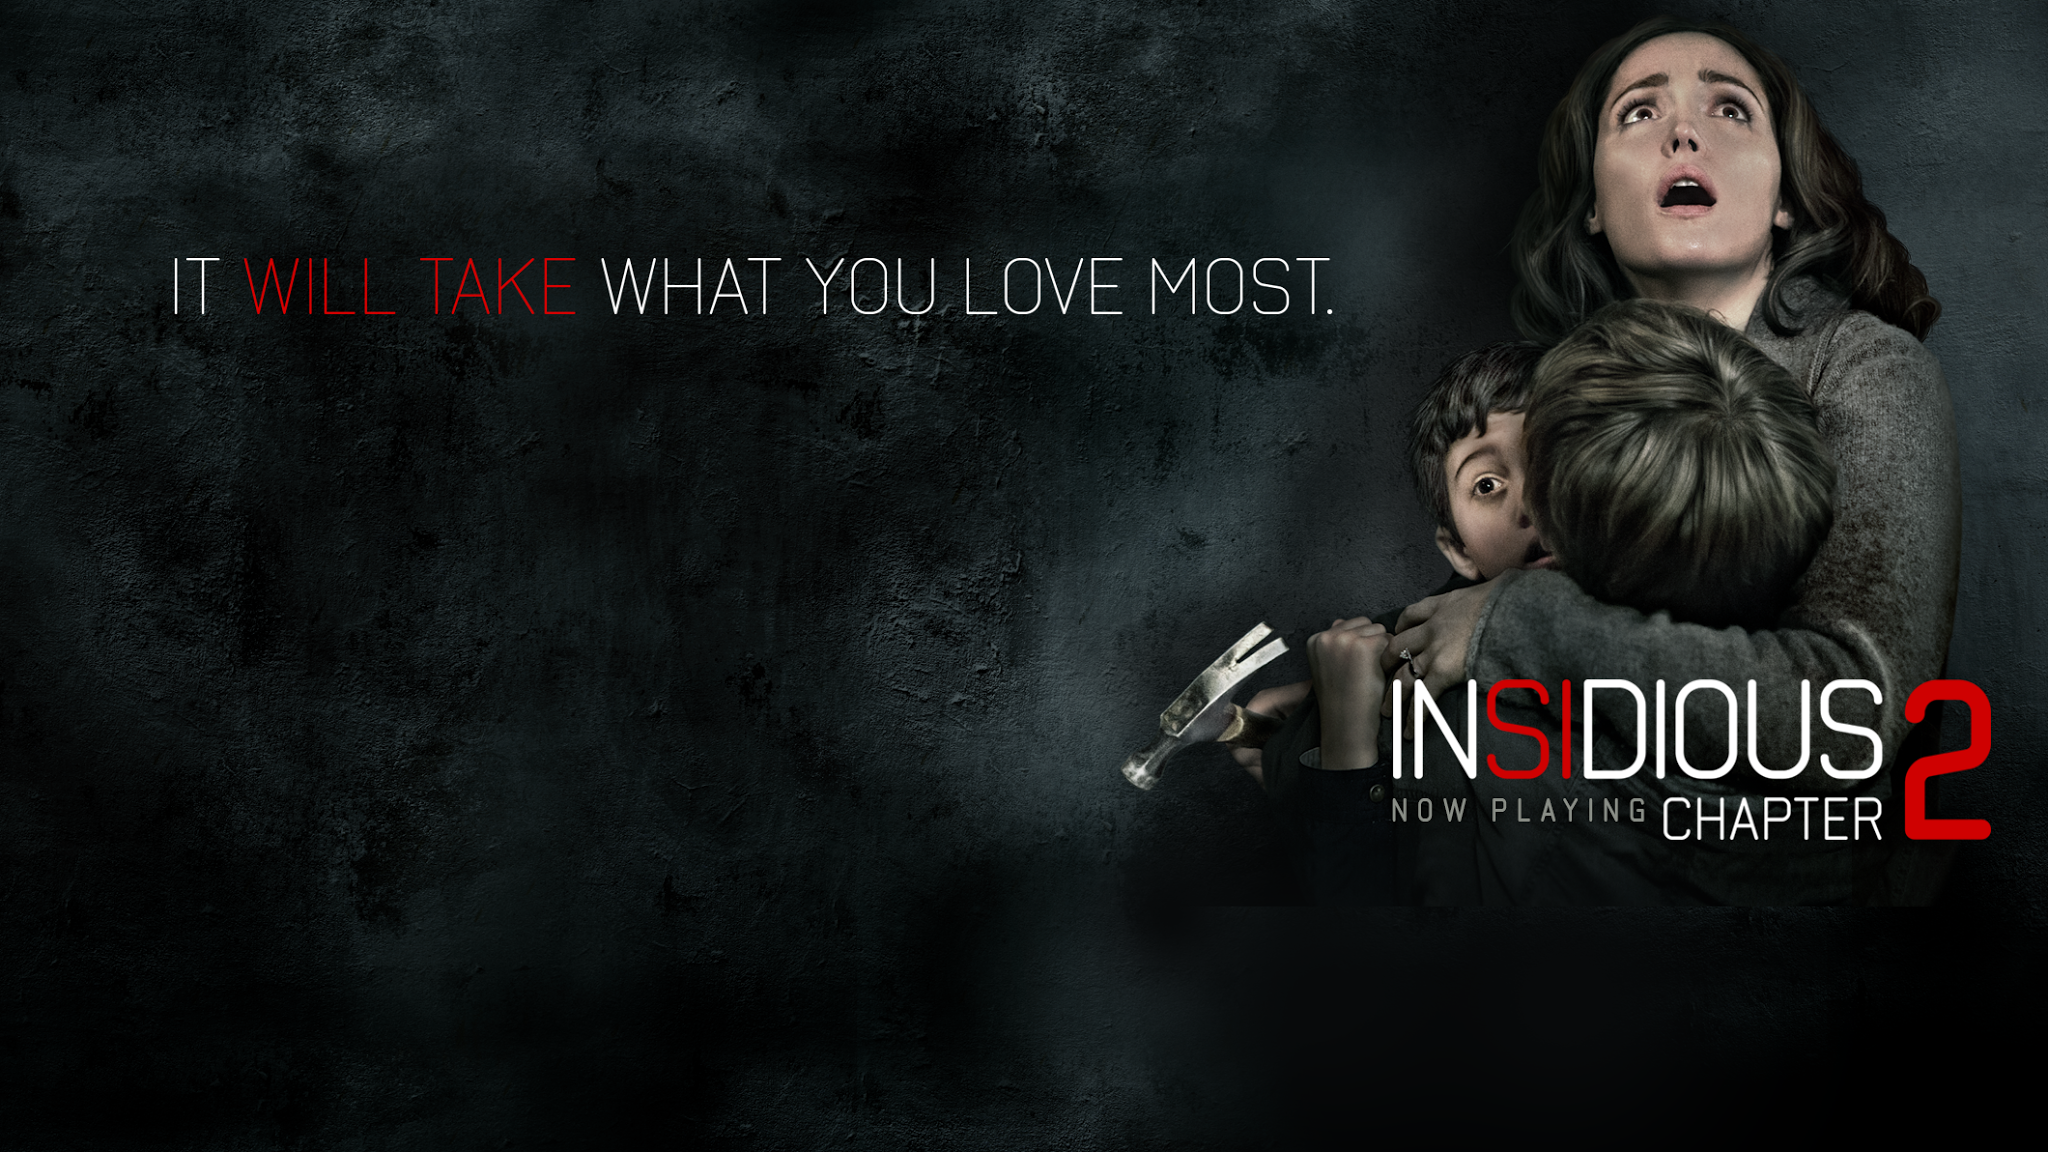 Insidious-Chapter-2-Movie-Poster